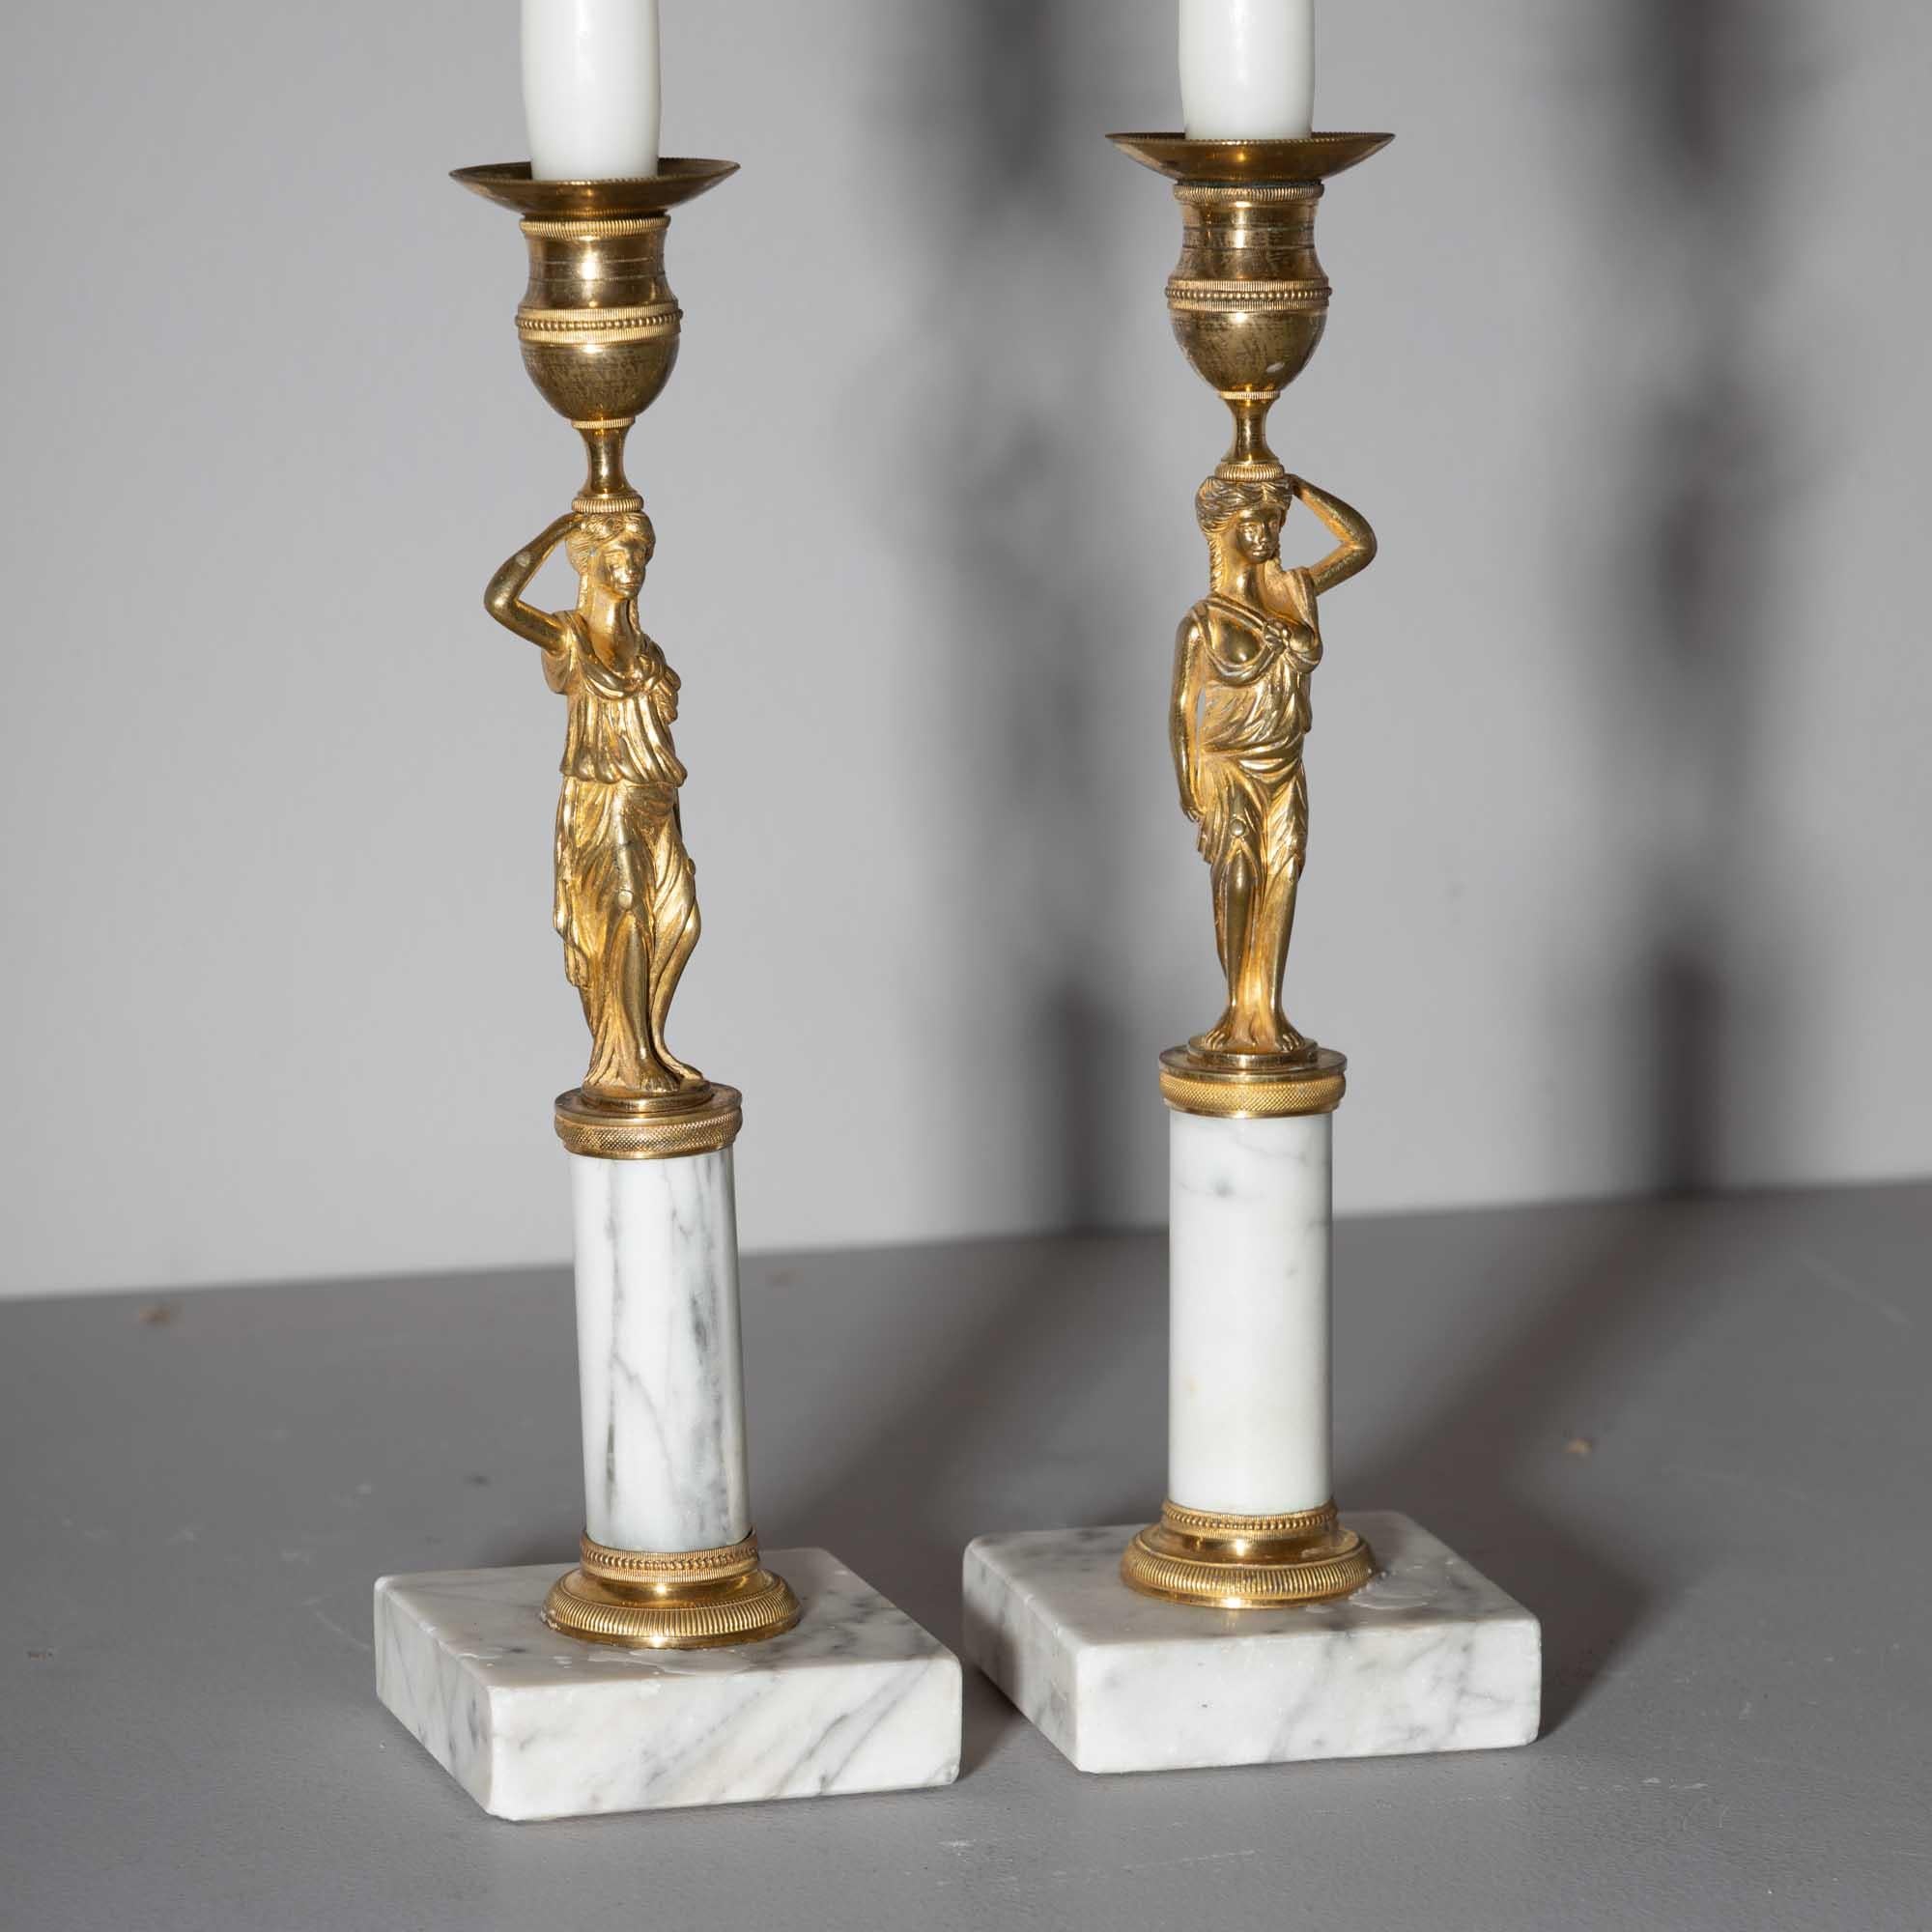 Pair of Candleholders with Karyatids, Bronze & Marble, Berlin Early 19th Century In Good Condition For Sale In New York, NY